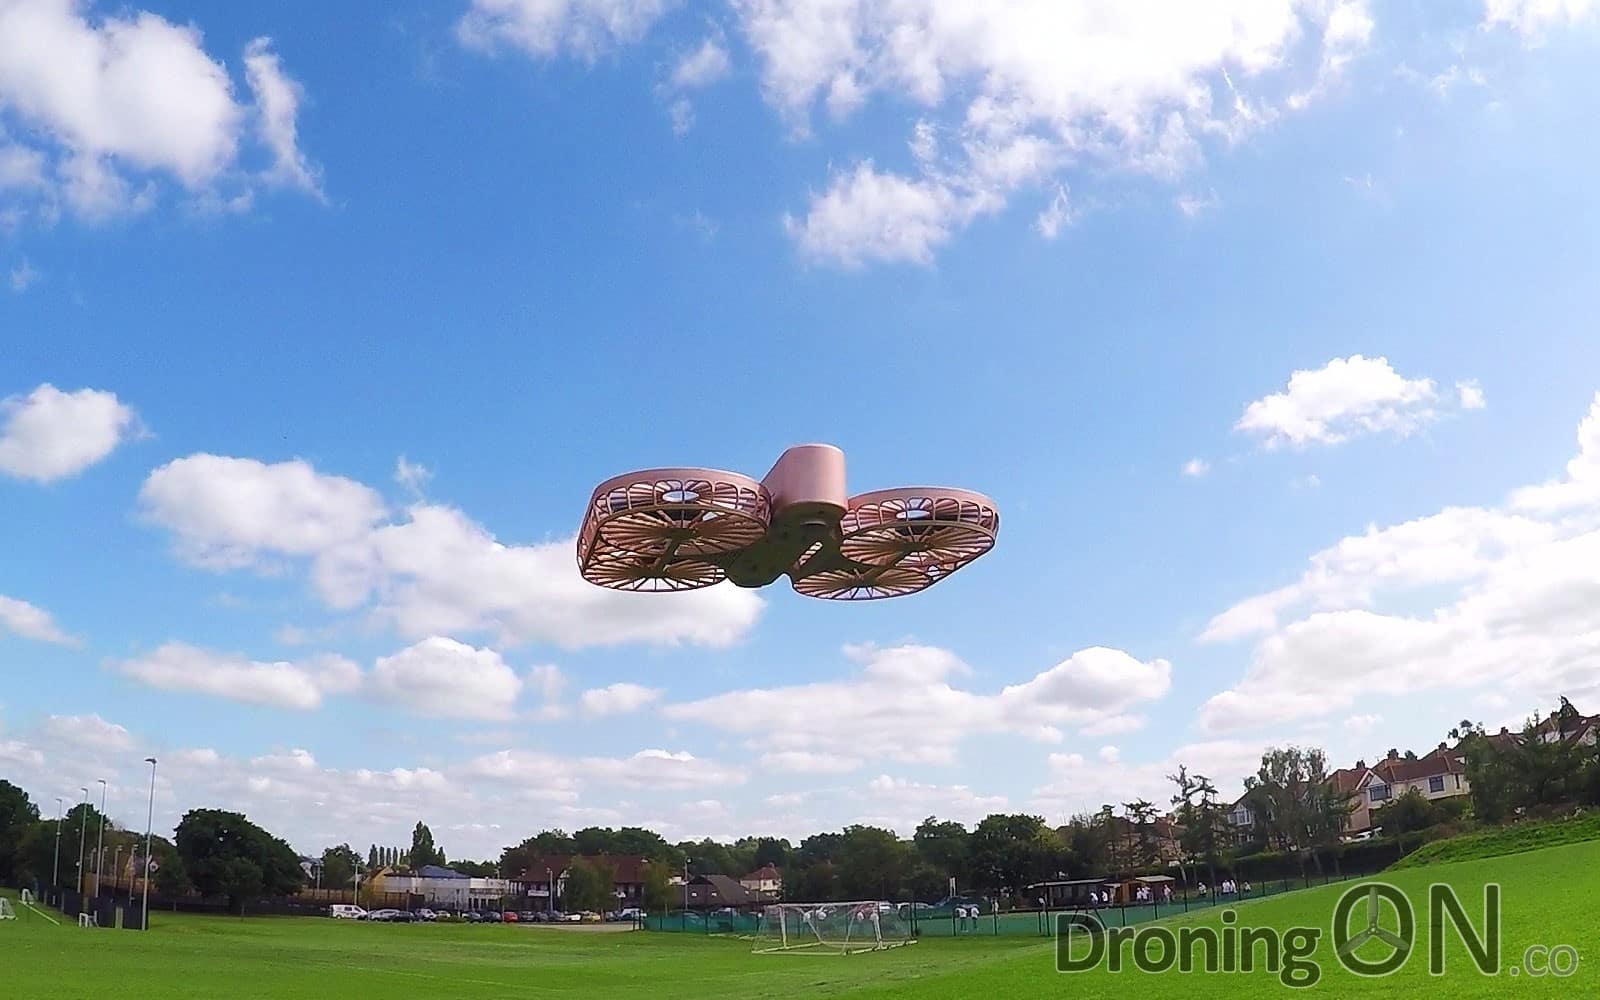 The DroningON exclusive flight test review of the new SimToo Moment Drone.